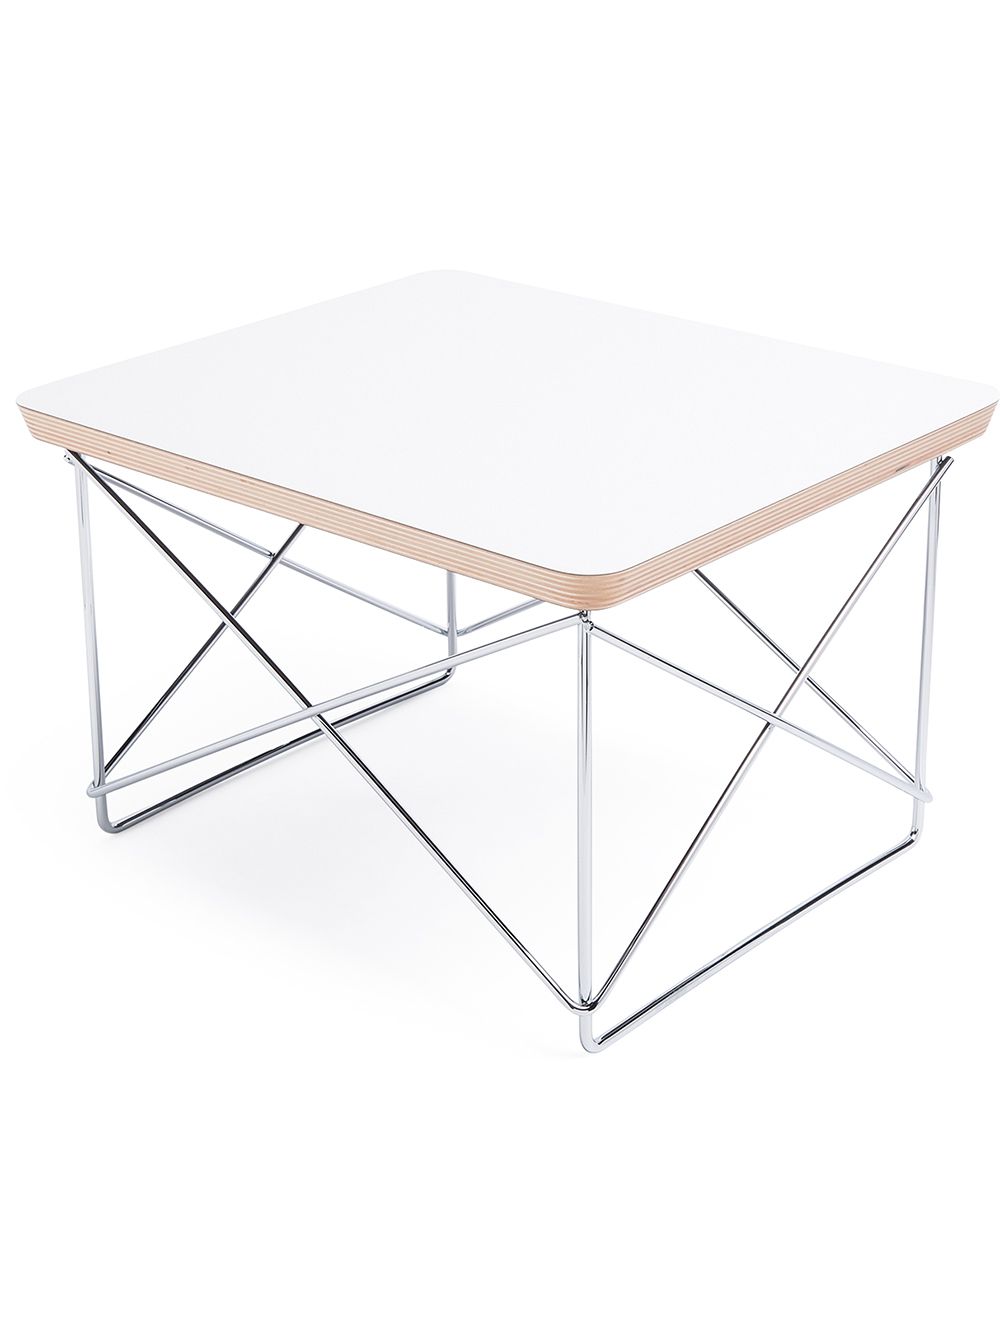 Vitra LTR occasional table - Brown von Vitra